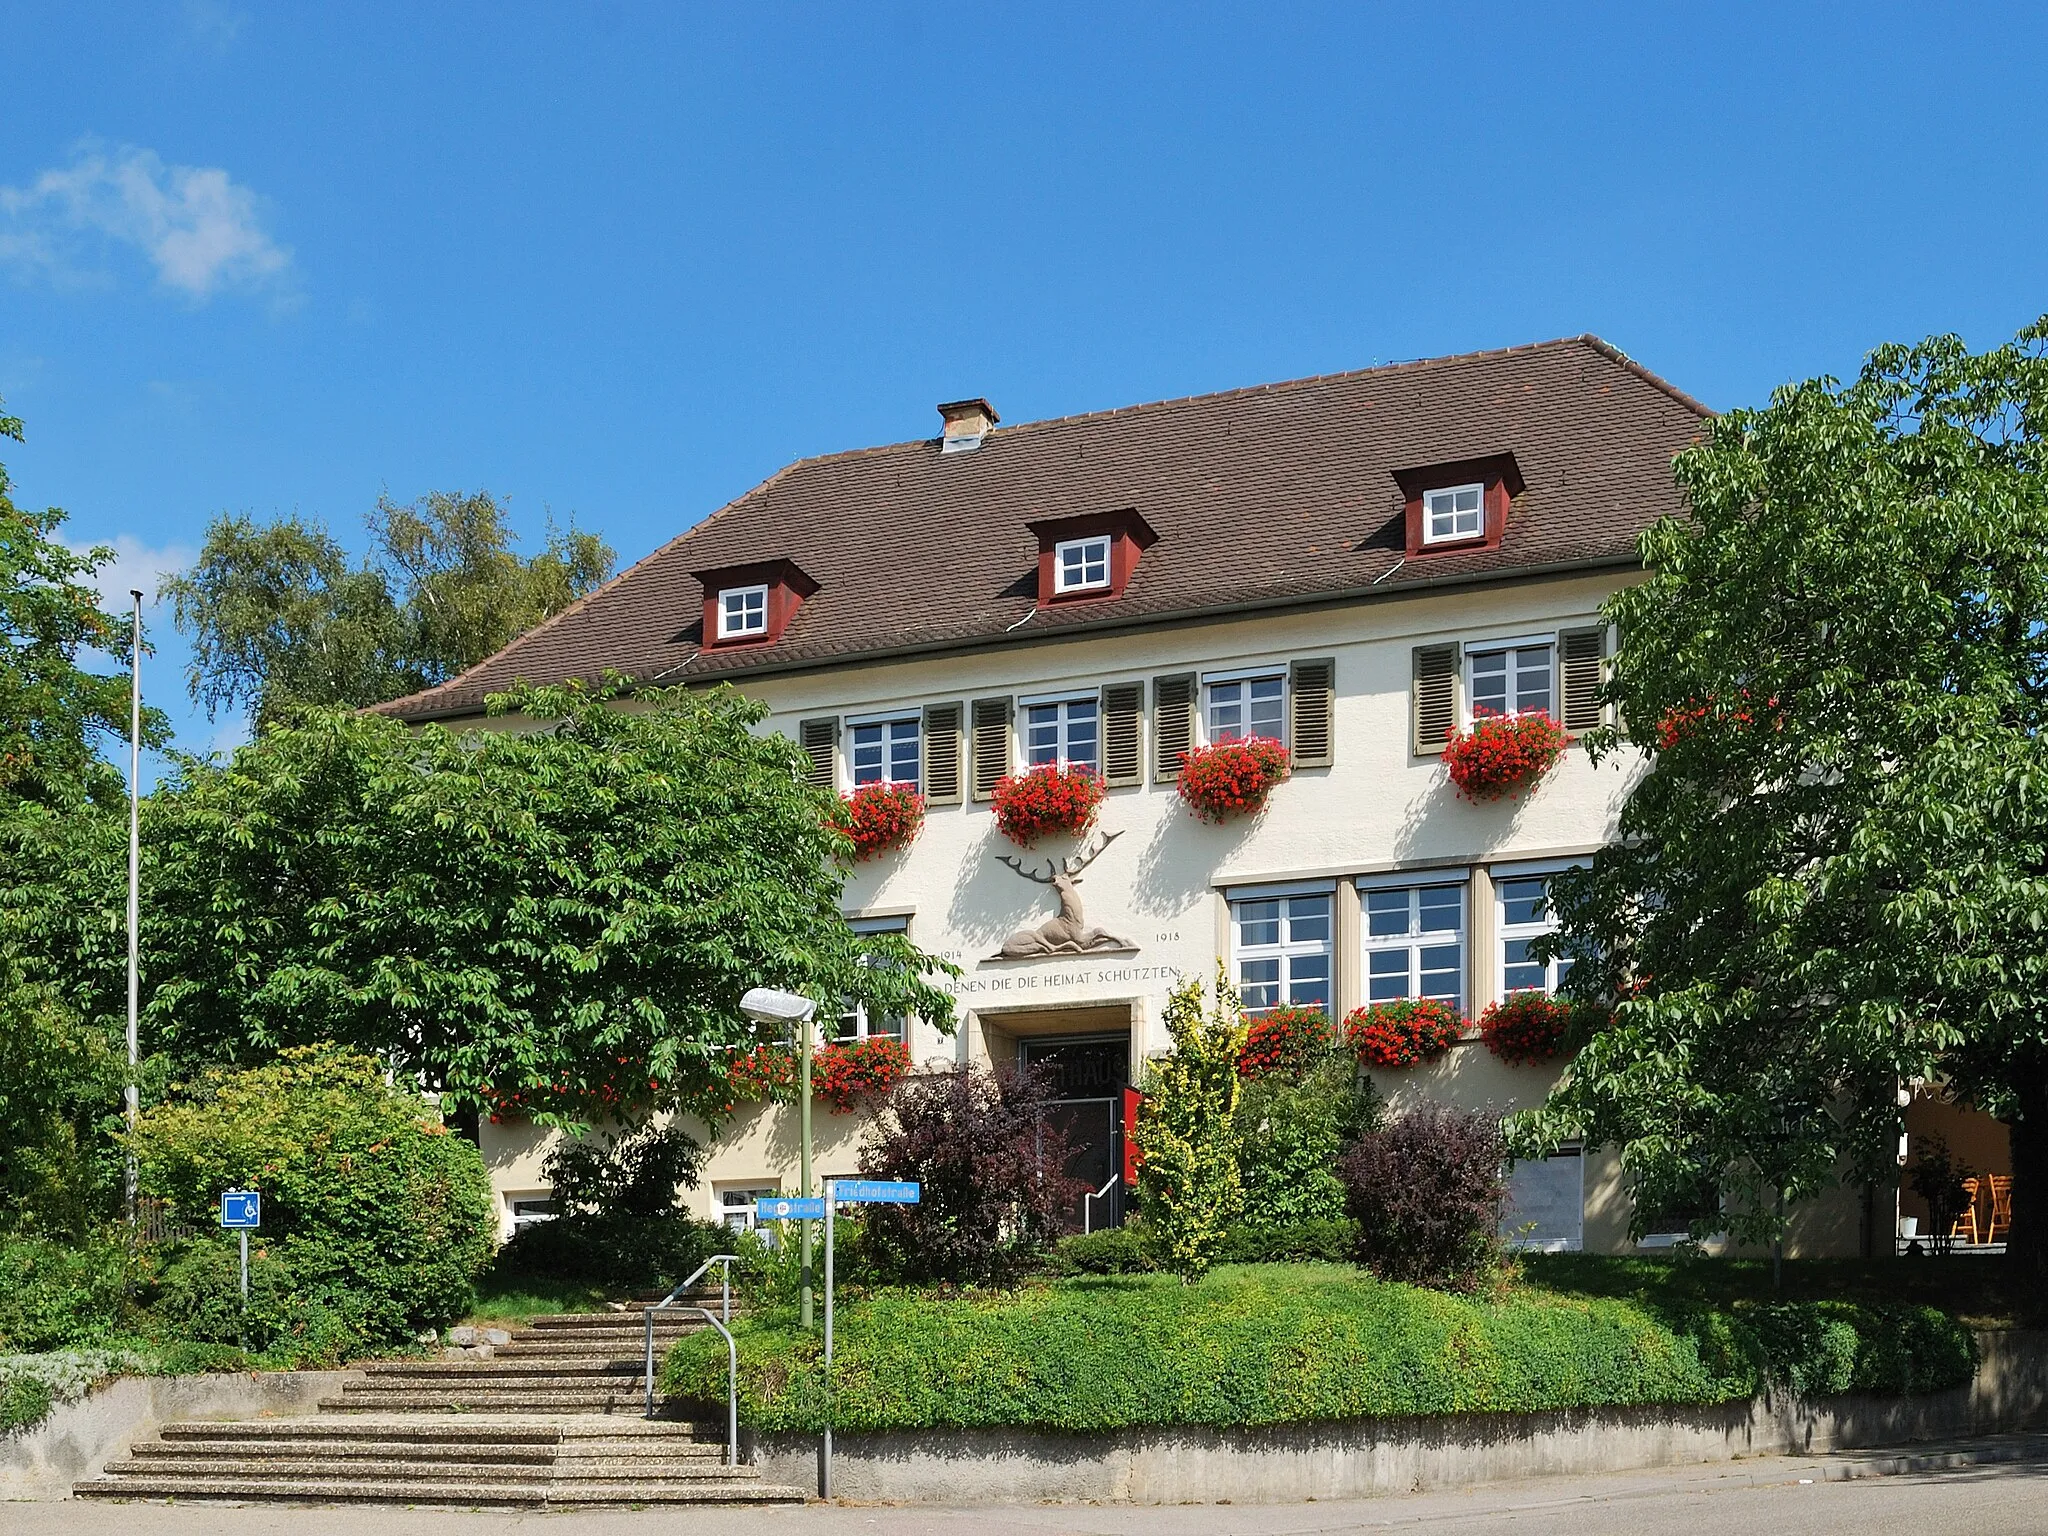 Photo showing: The municipal hall in Hirschlanden in Baden-Württemberg, Germany. The house was built in 1930 as a schoolhouse and an apartment for teacher. It was reconstructed in 1966 and it is used since then as the municipal hall.